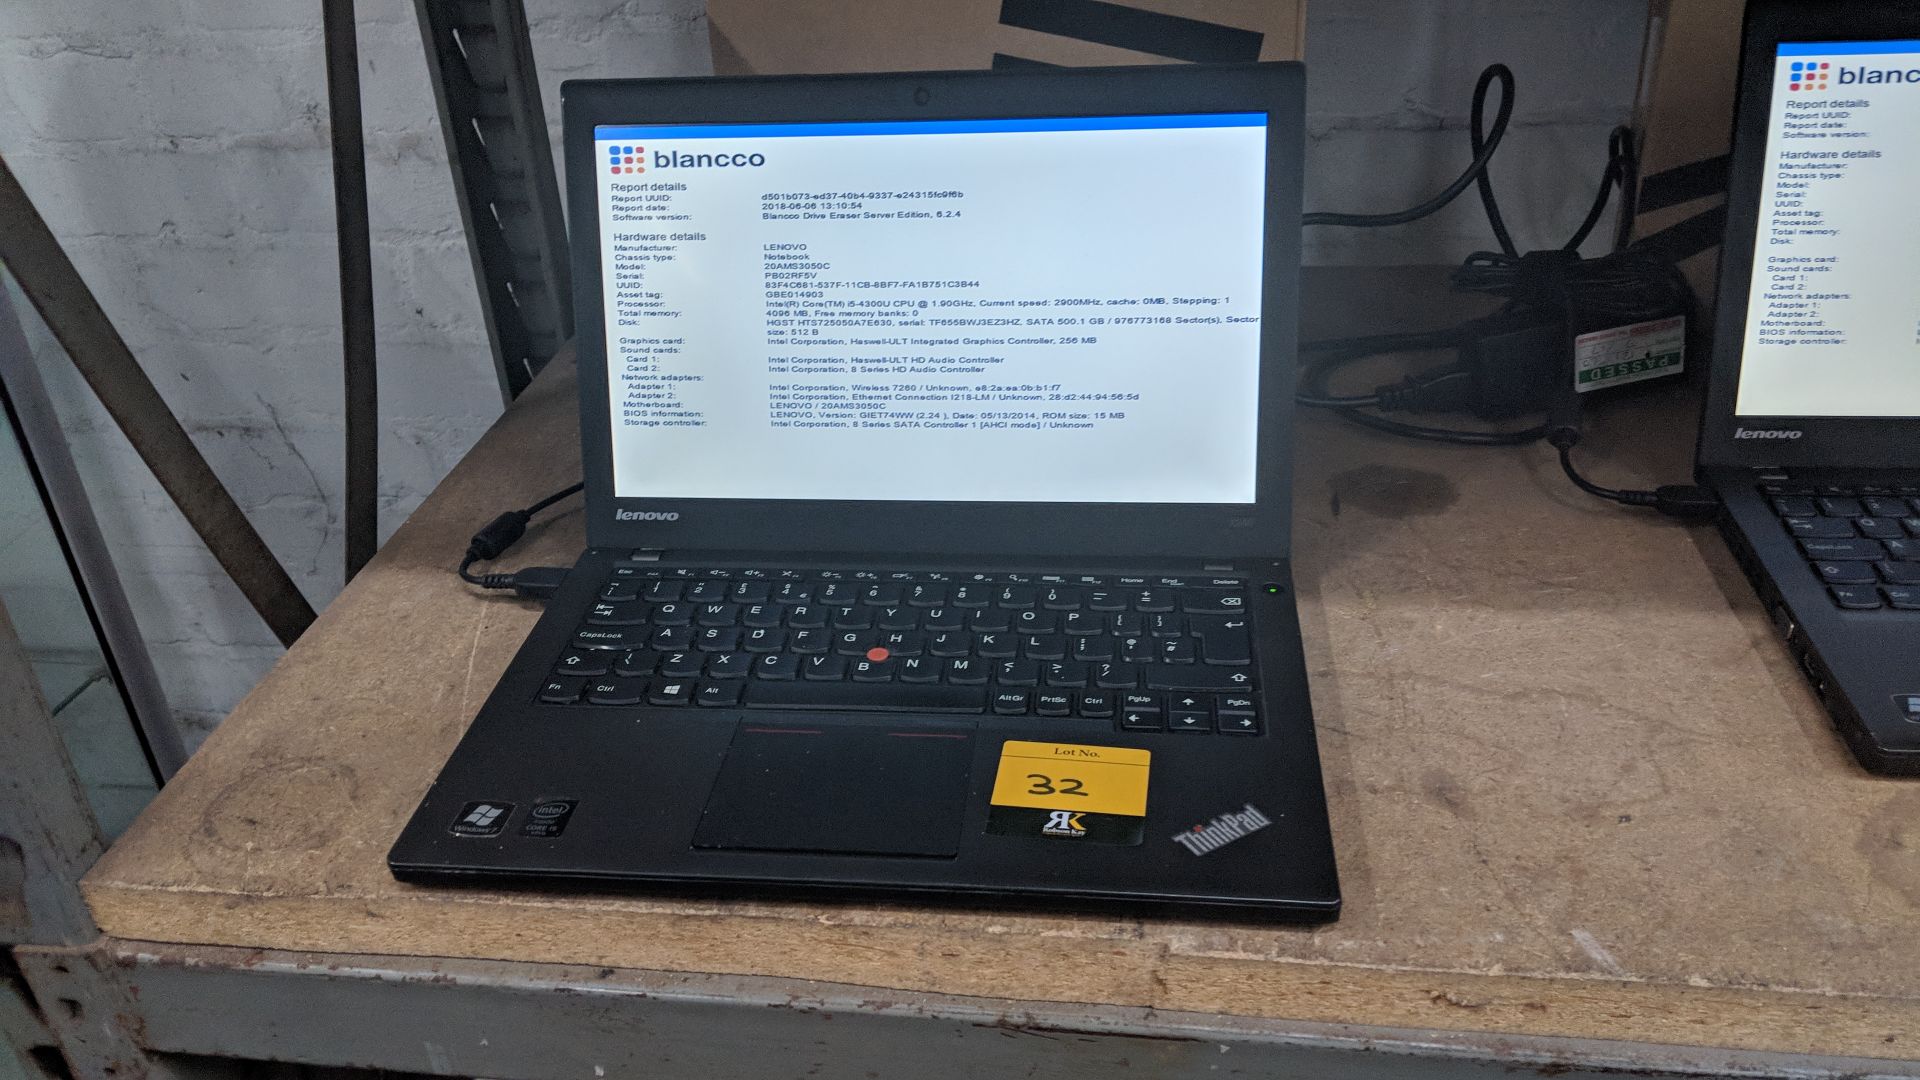 Lenovo ThinkPad X240 notebook computer model 20 AMS3050C with Intel Core i5 4300U CPU@1.9GHz, 4Gb - Image 4 of 6